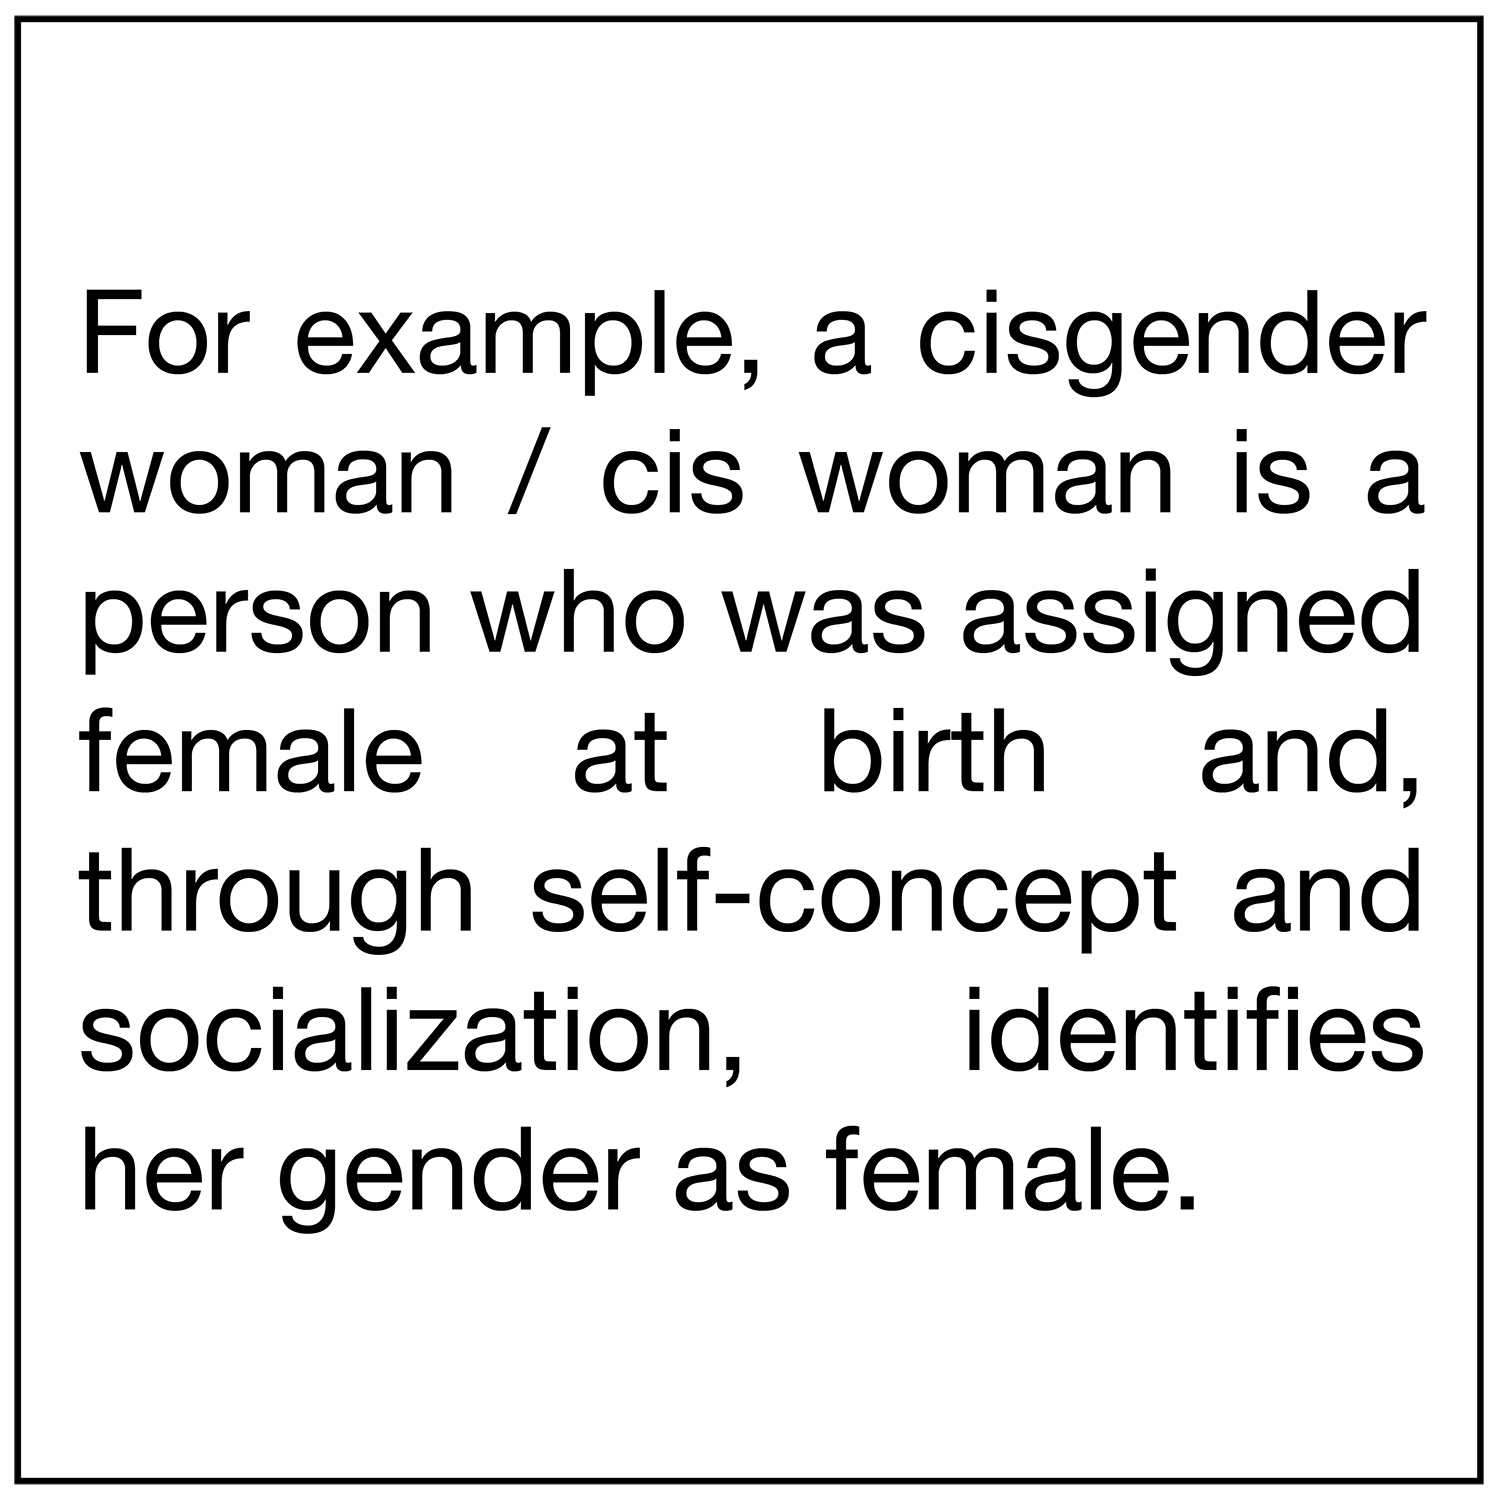  For example, a cisgender woman / cis woman is a person who was assigned female at birth and, through self-concept and socialization, identifies her gender as female. 